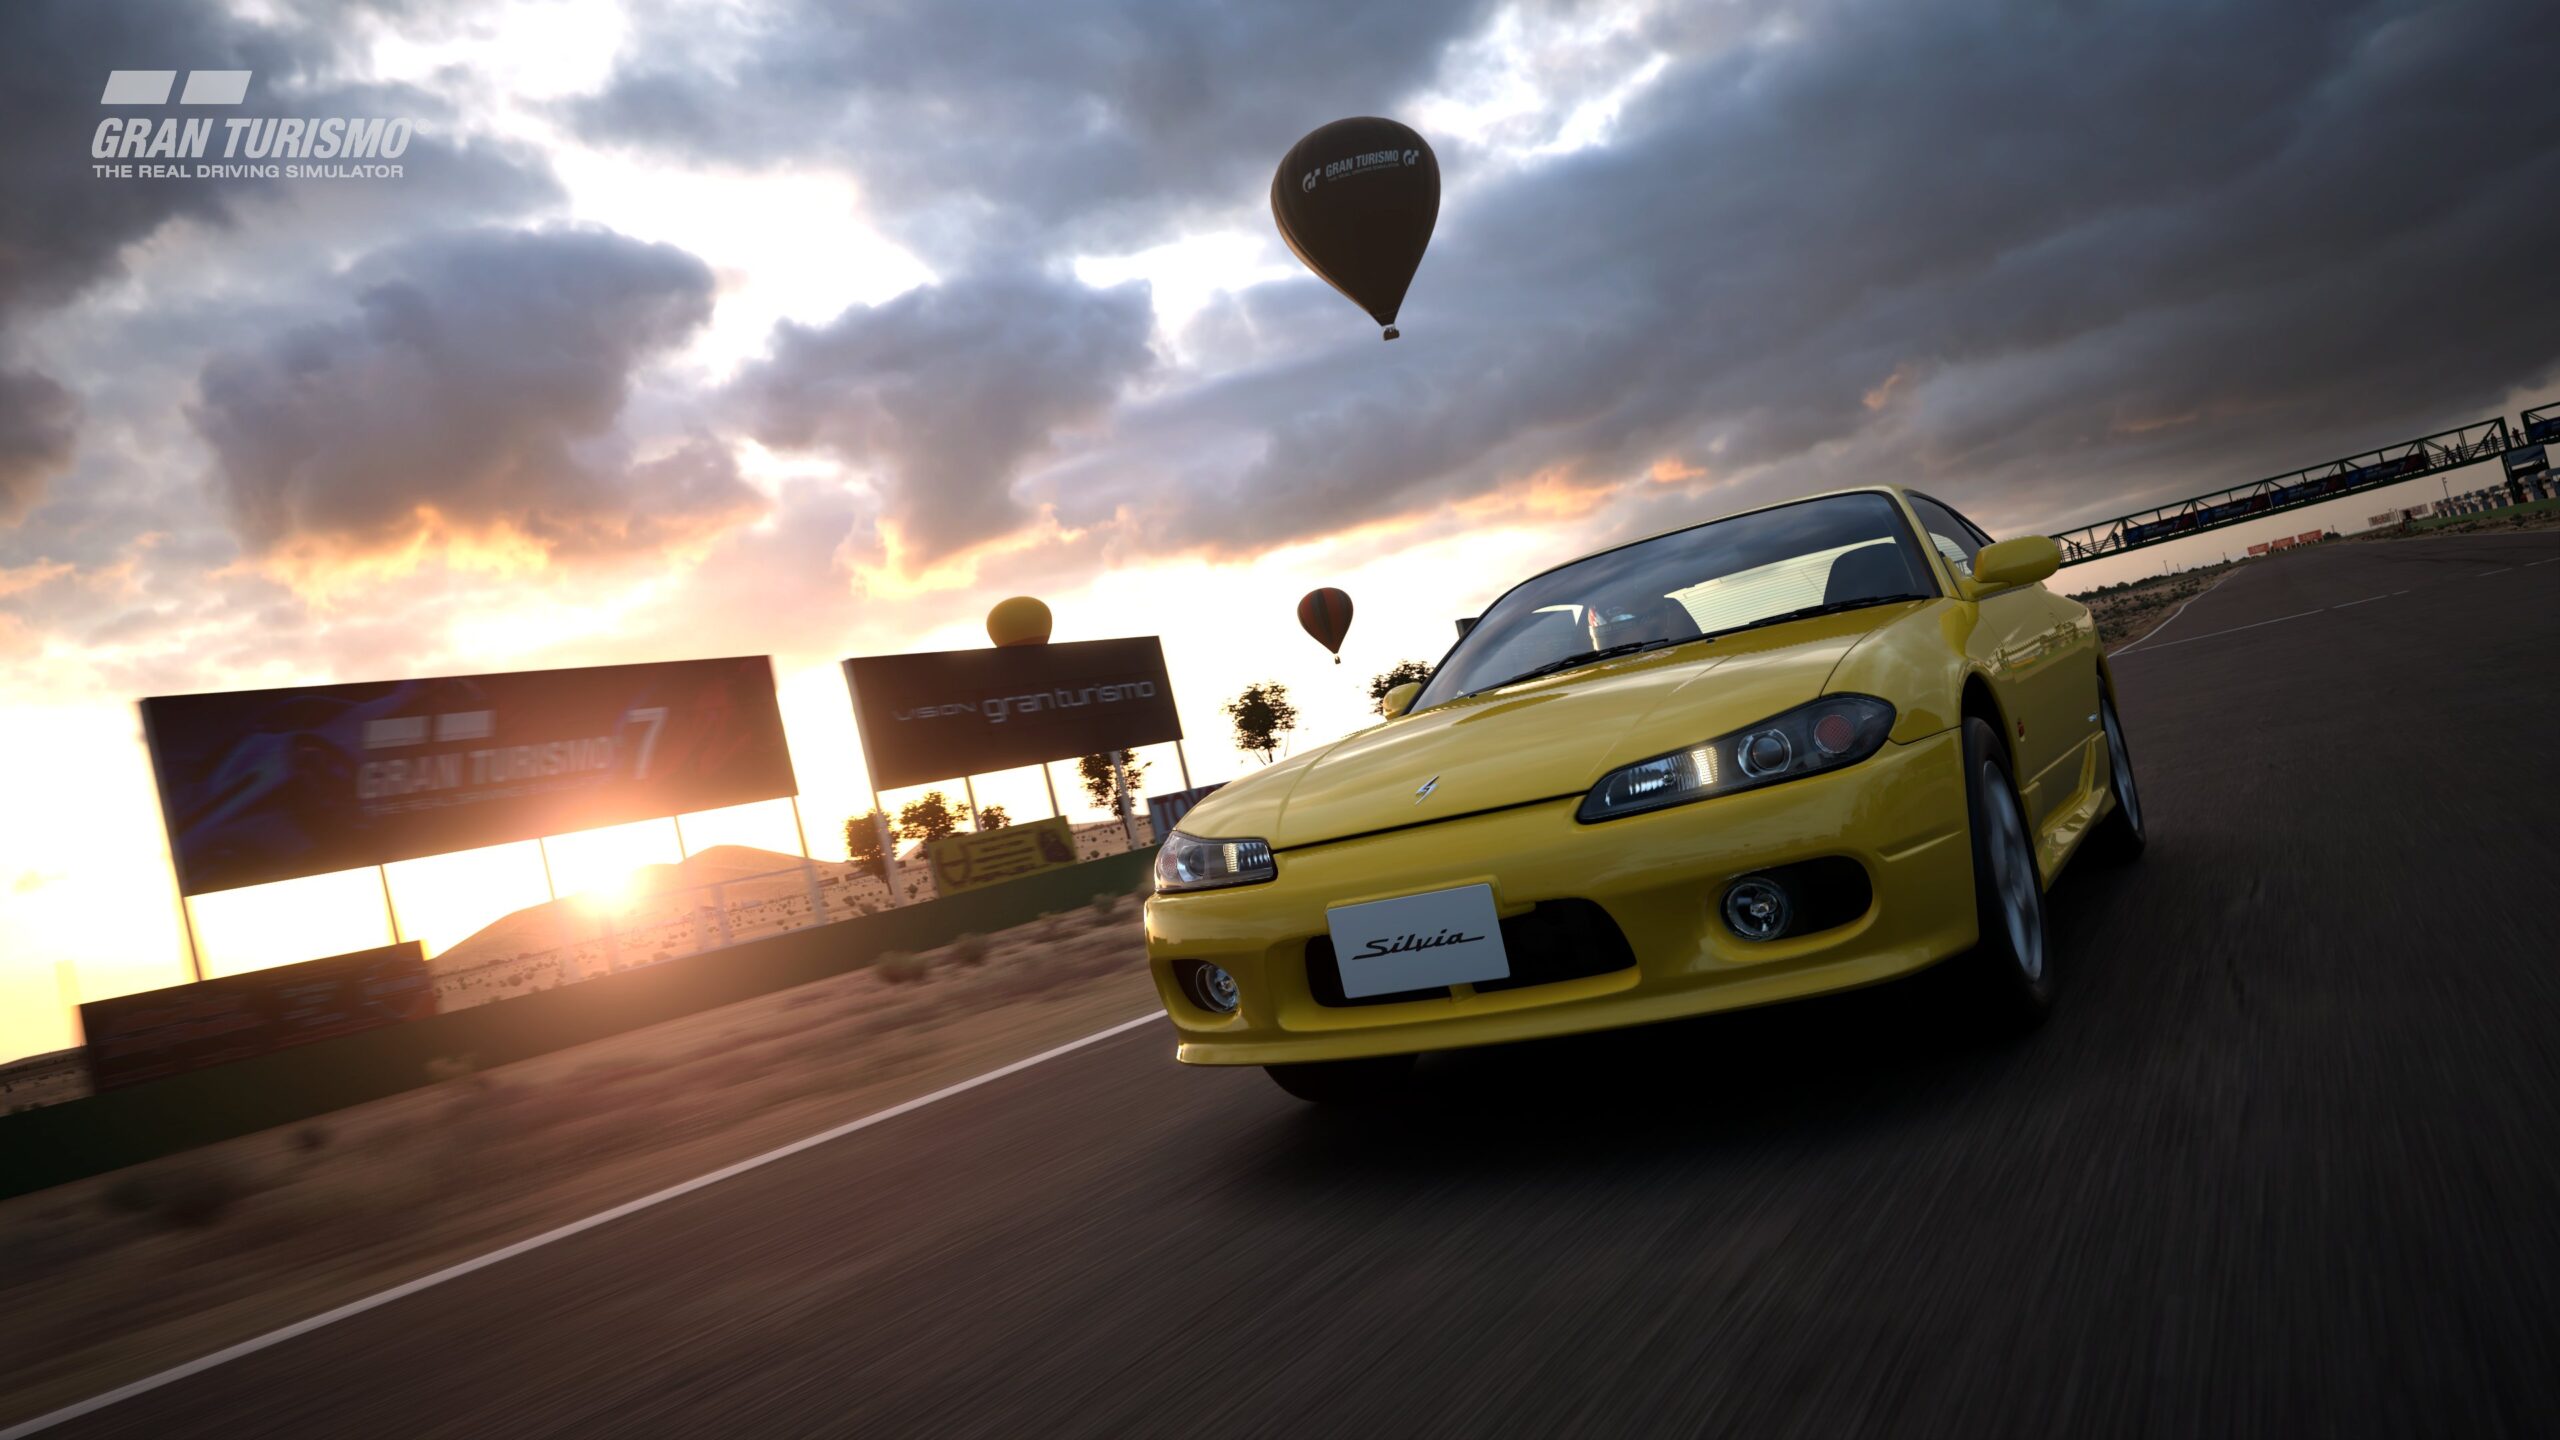 Gran Turismo 7’s boss says he’s ‘considering and looking
into’ a PC port